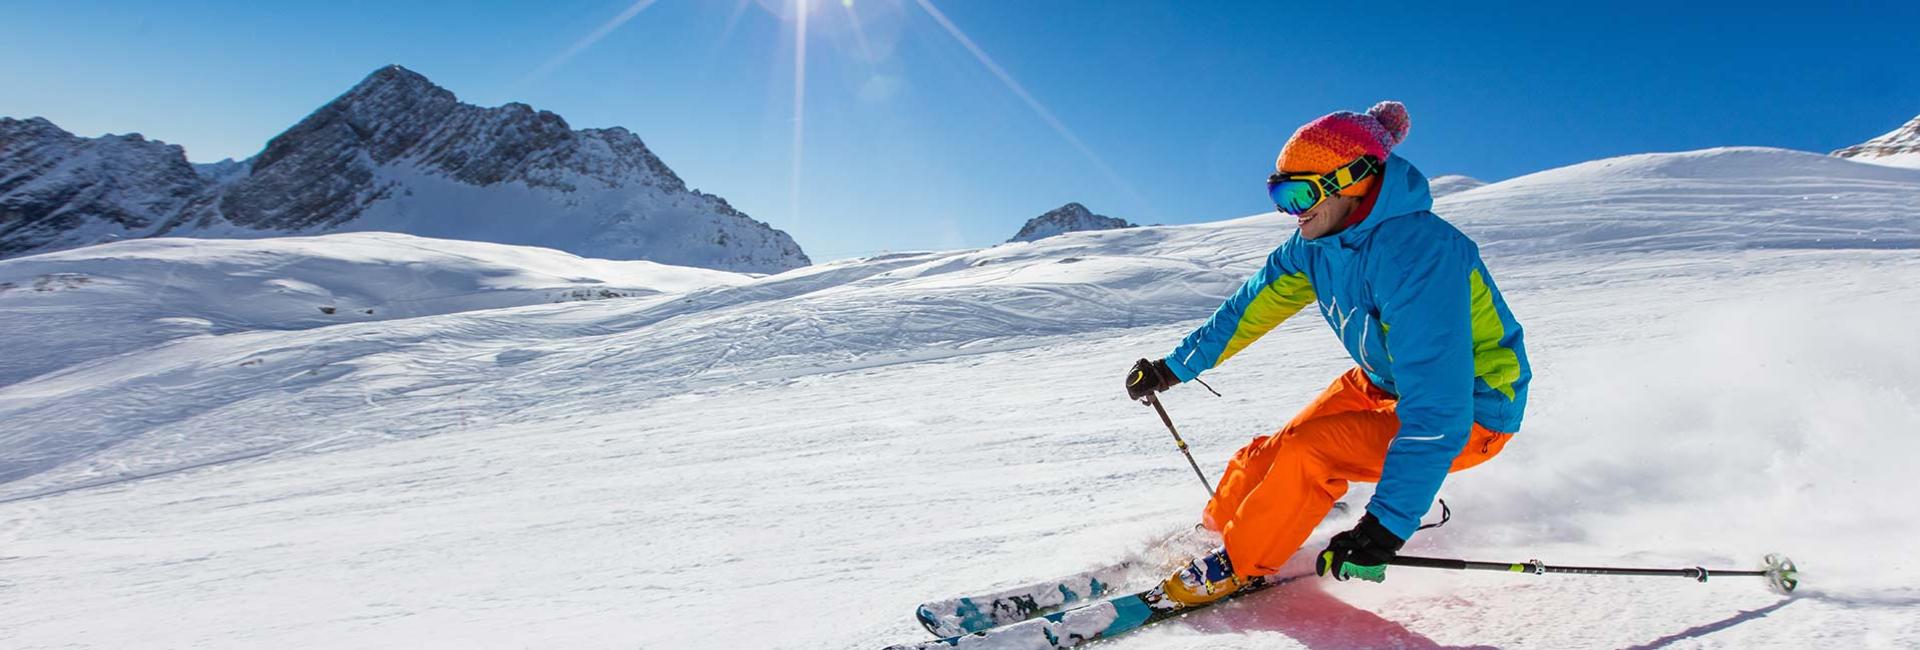 hotelcristinapinzolo en promotional-weeks-with-discounted-skipass-2023-2024 013